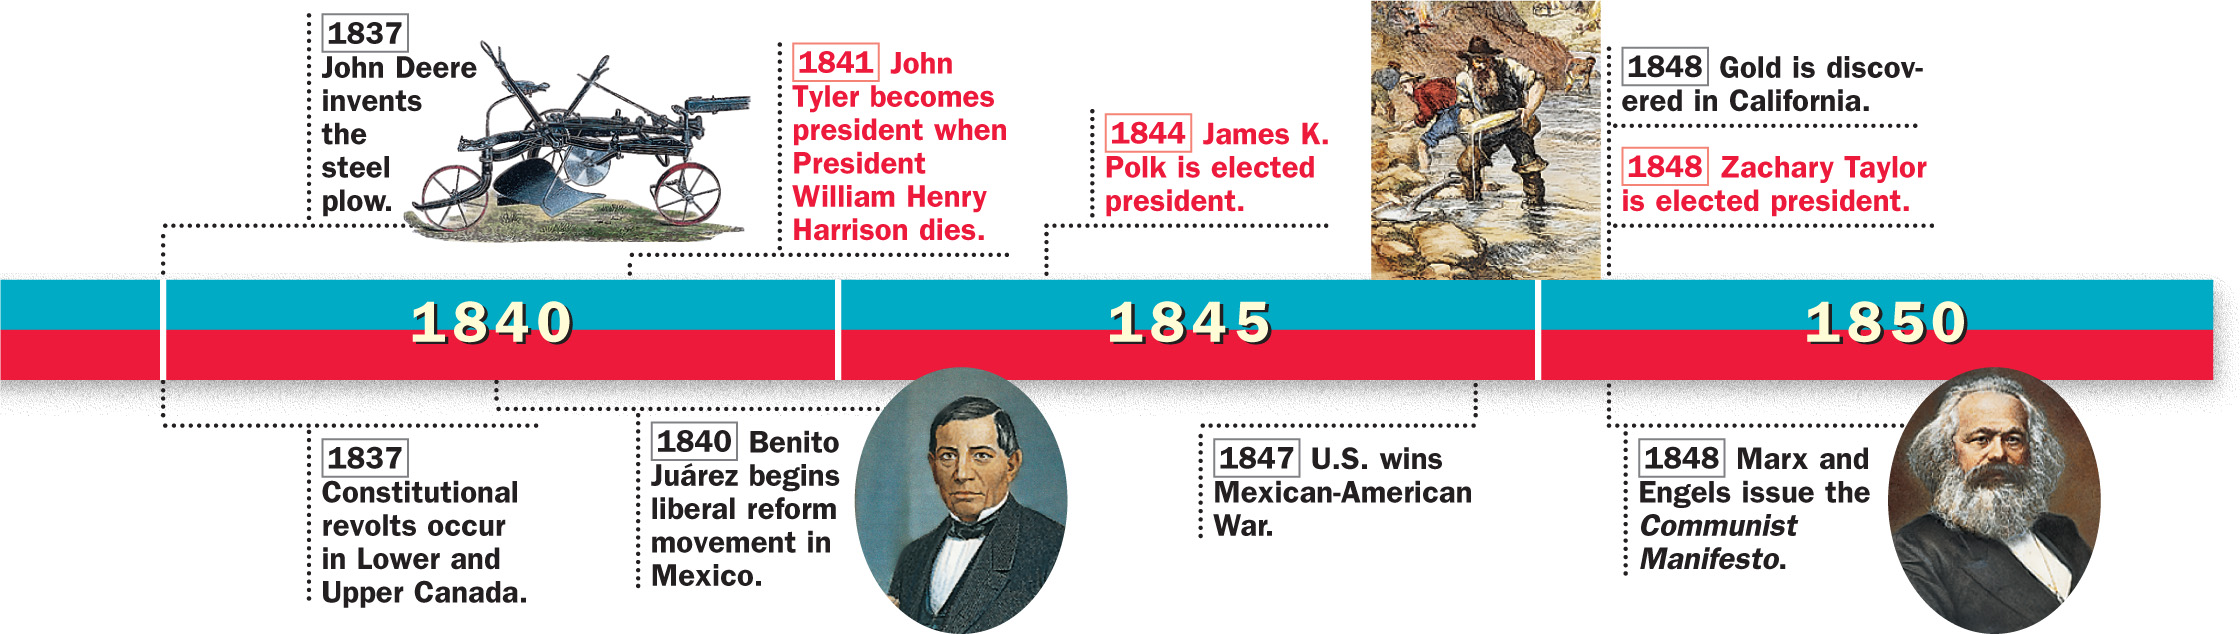 A timeline of historical events from 1825 to 1850 in both the U.S. and the world